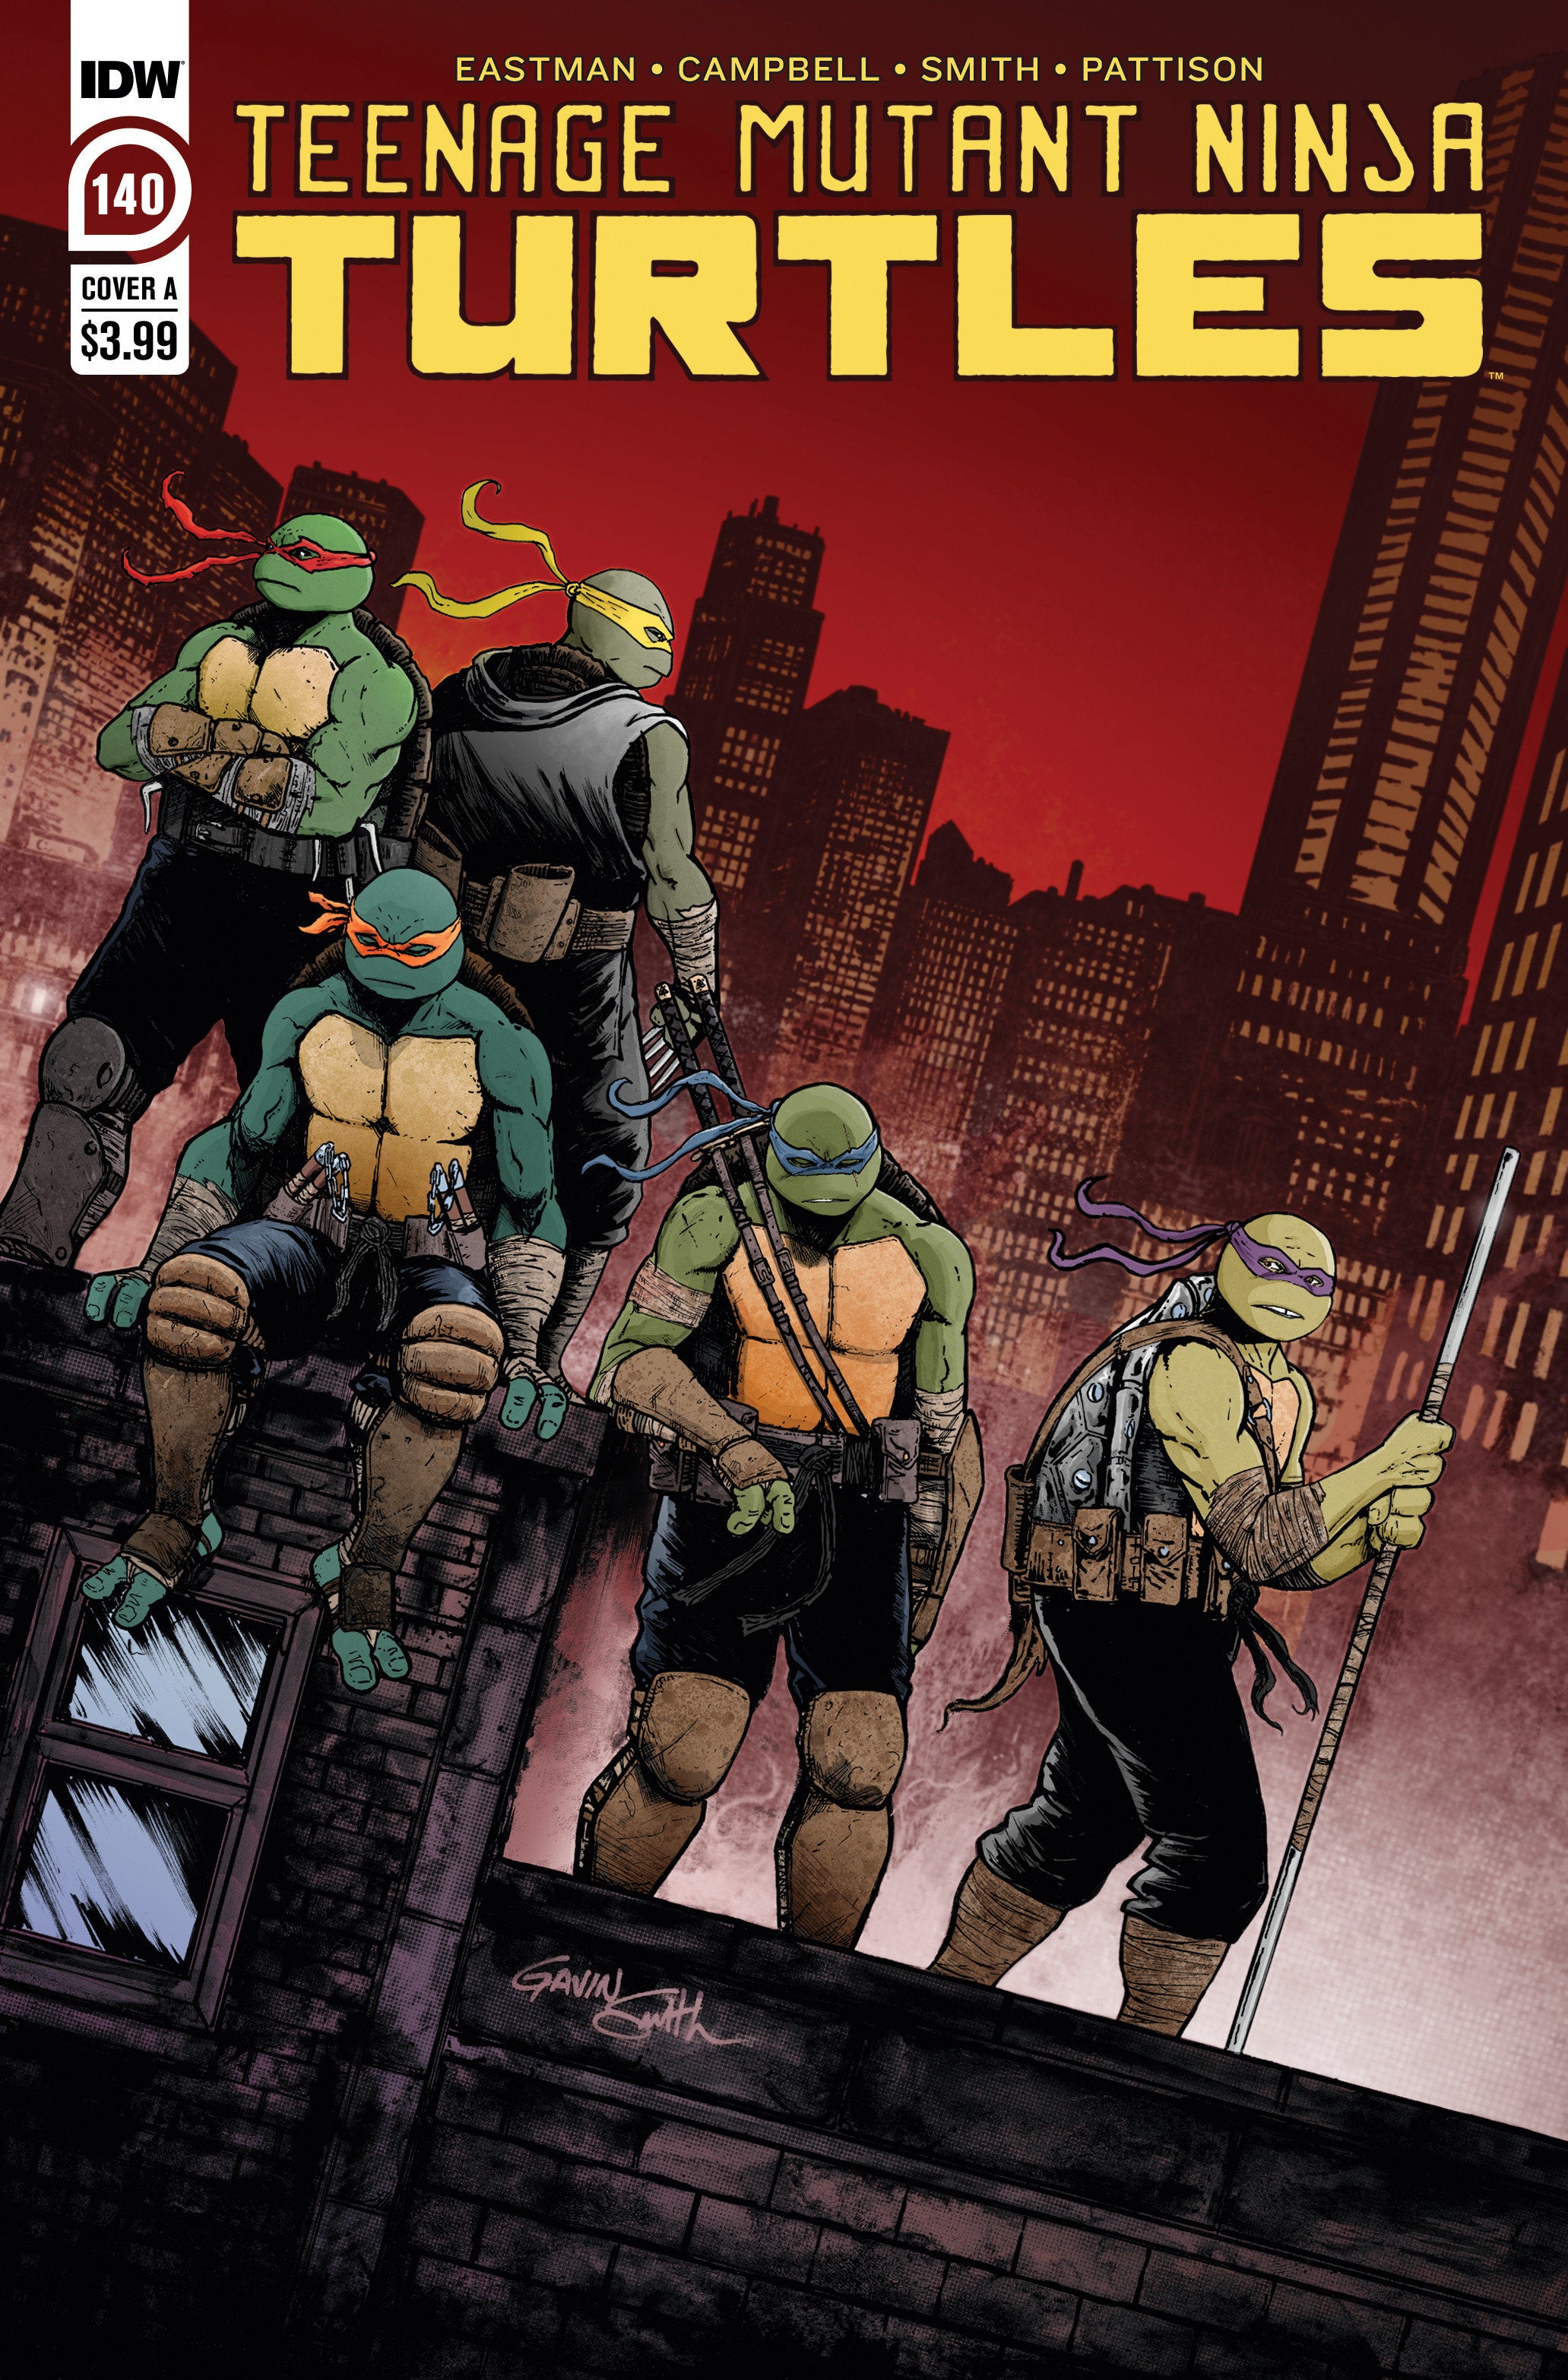 Teenage Mutant Ninja Turtles #140 Cover A (Smith) | Game Master's Emporium (The New GME)